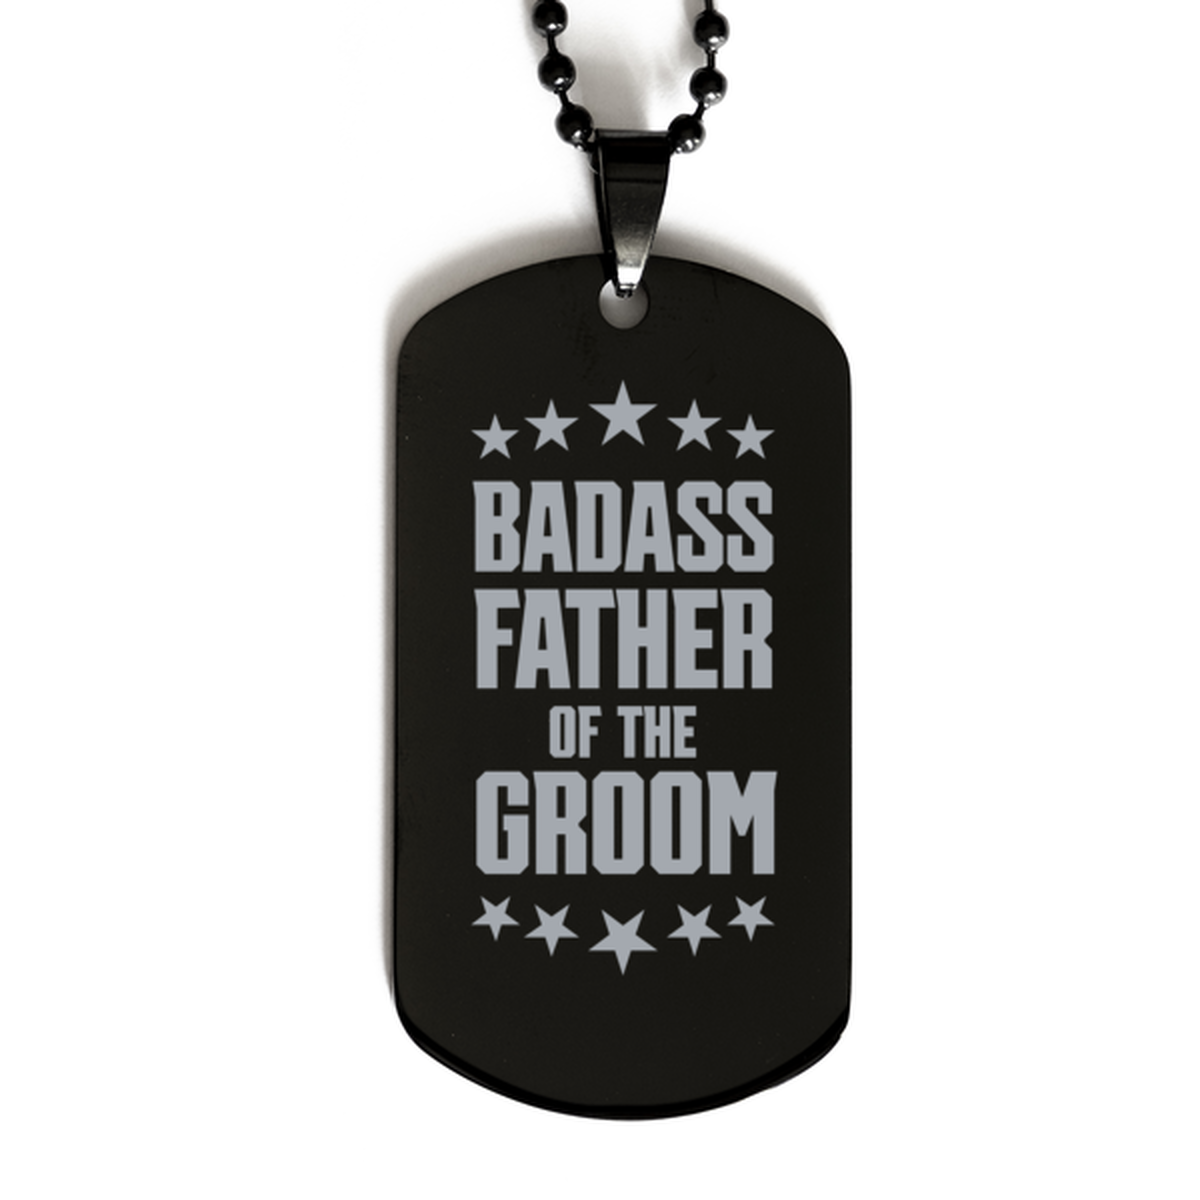 Father of the groom Black Dog Tag, Badass Father of the Broom, Funny Family Gifts  Necklace For Father of the groom From Son Daughter